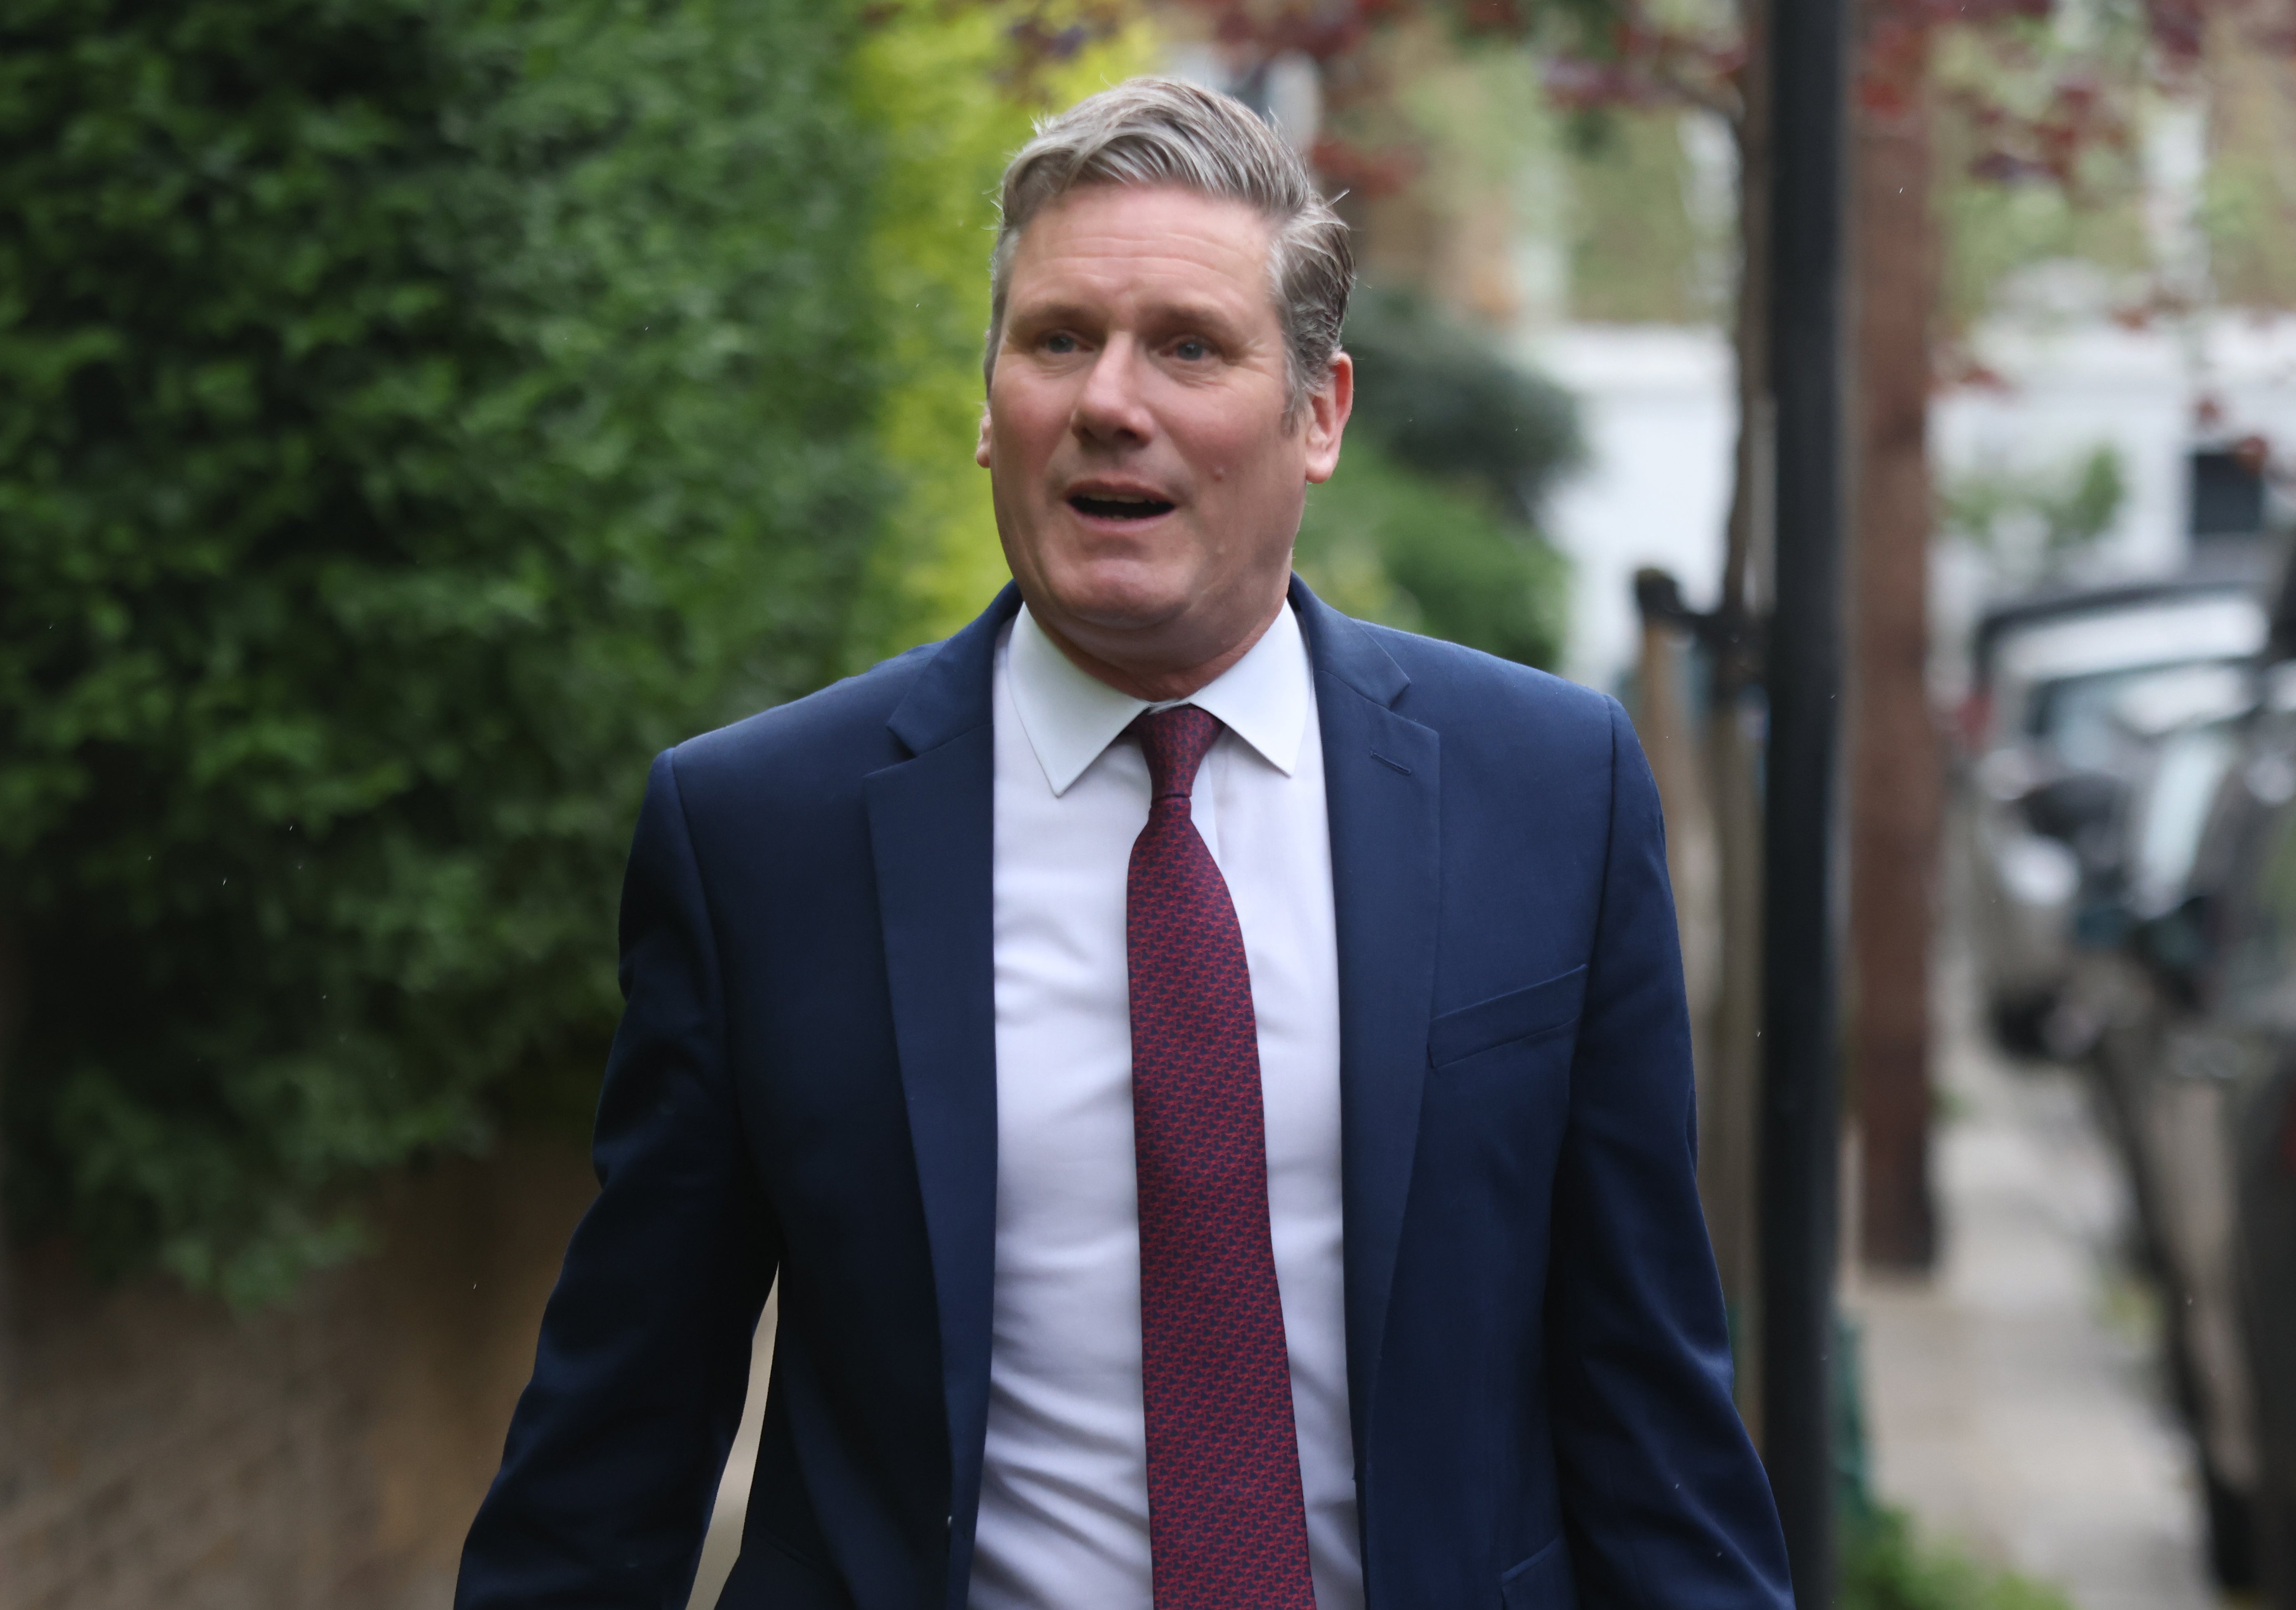 Labour leader Sir Keir Starmer leaves his north London home to attend the State Opening of Parliament (PA)